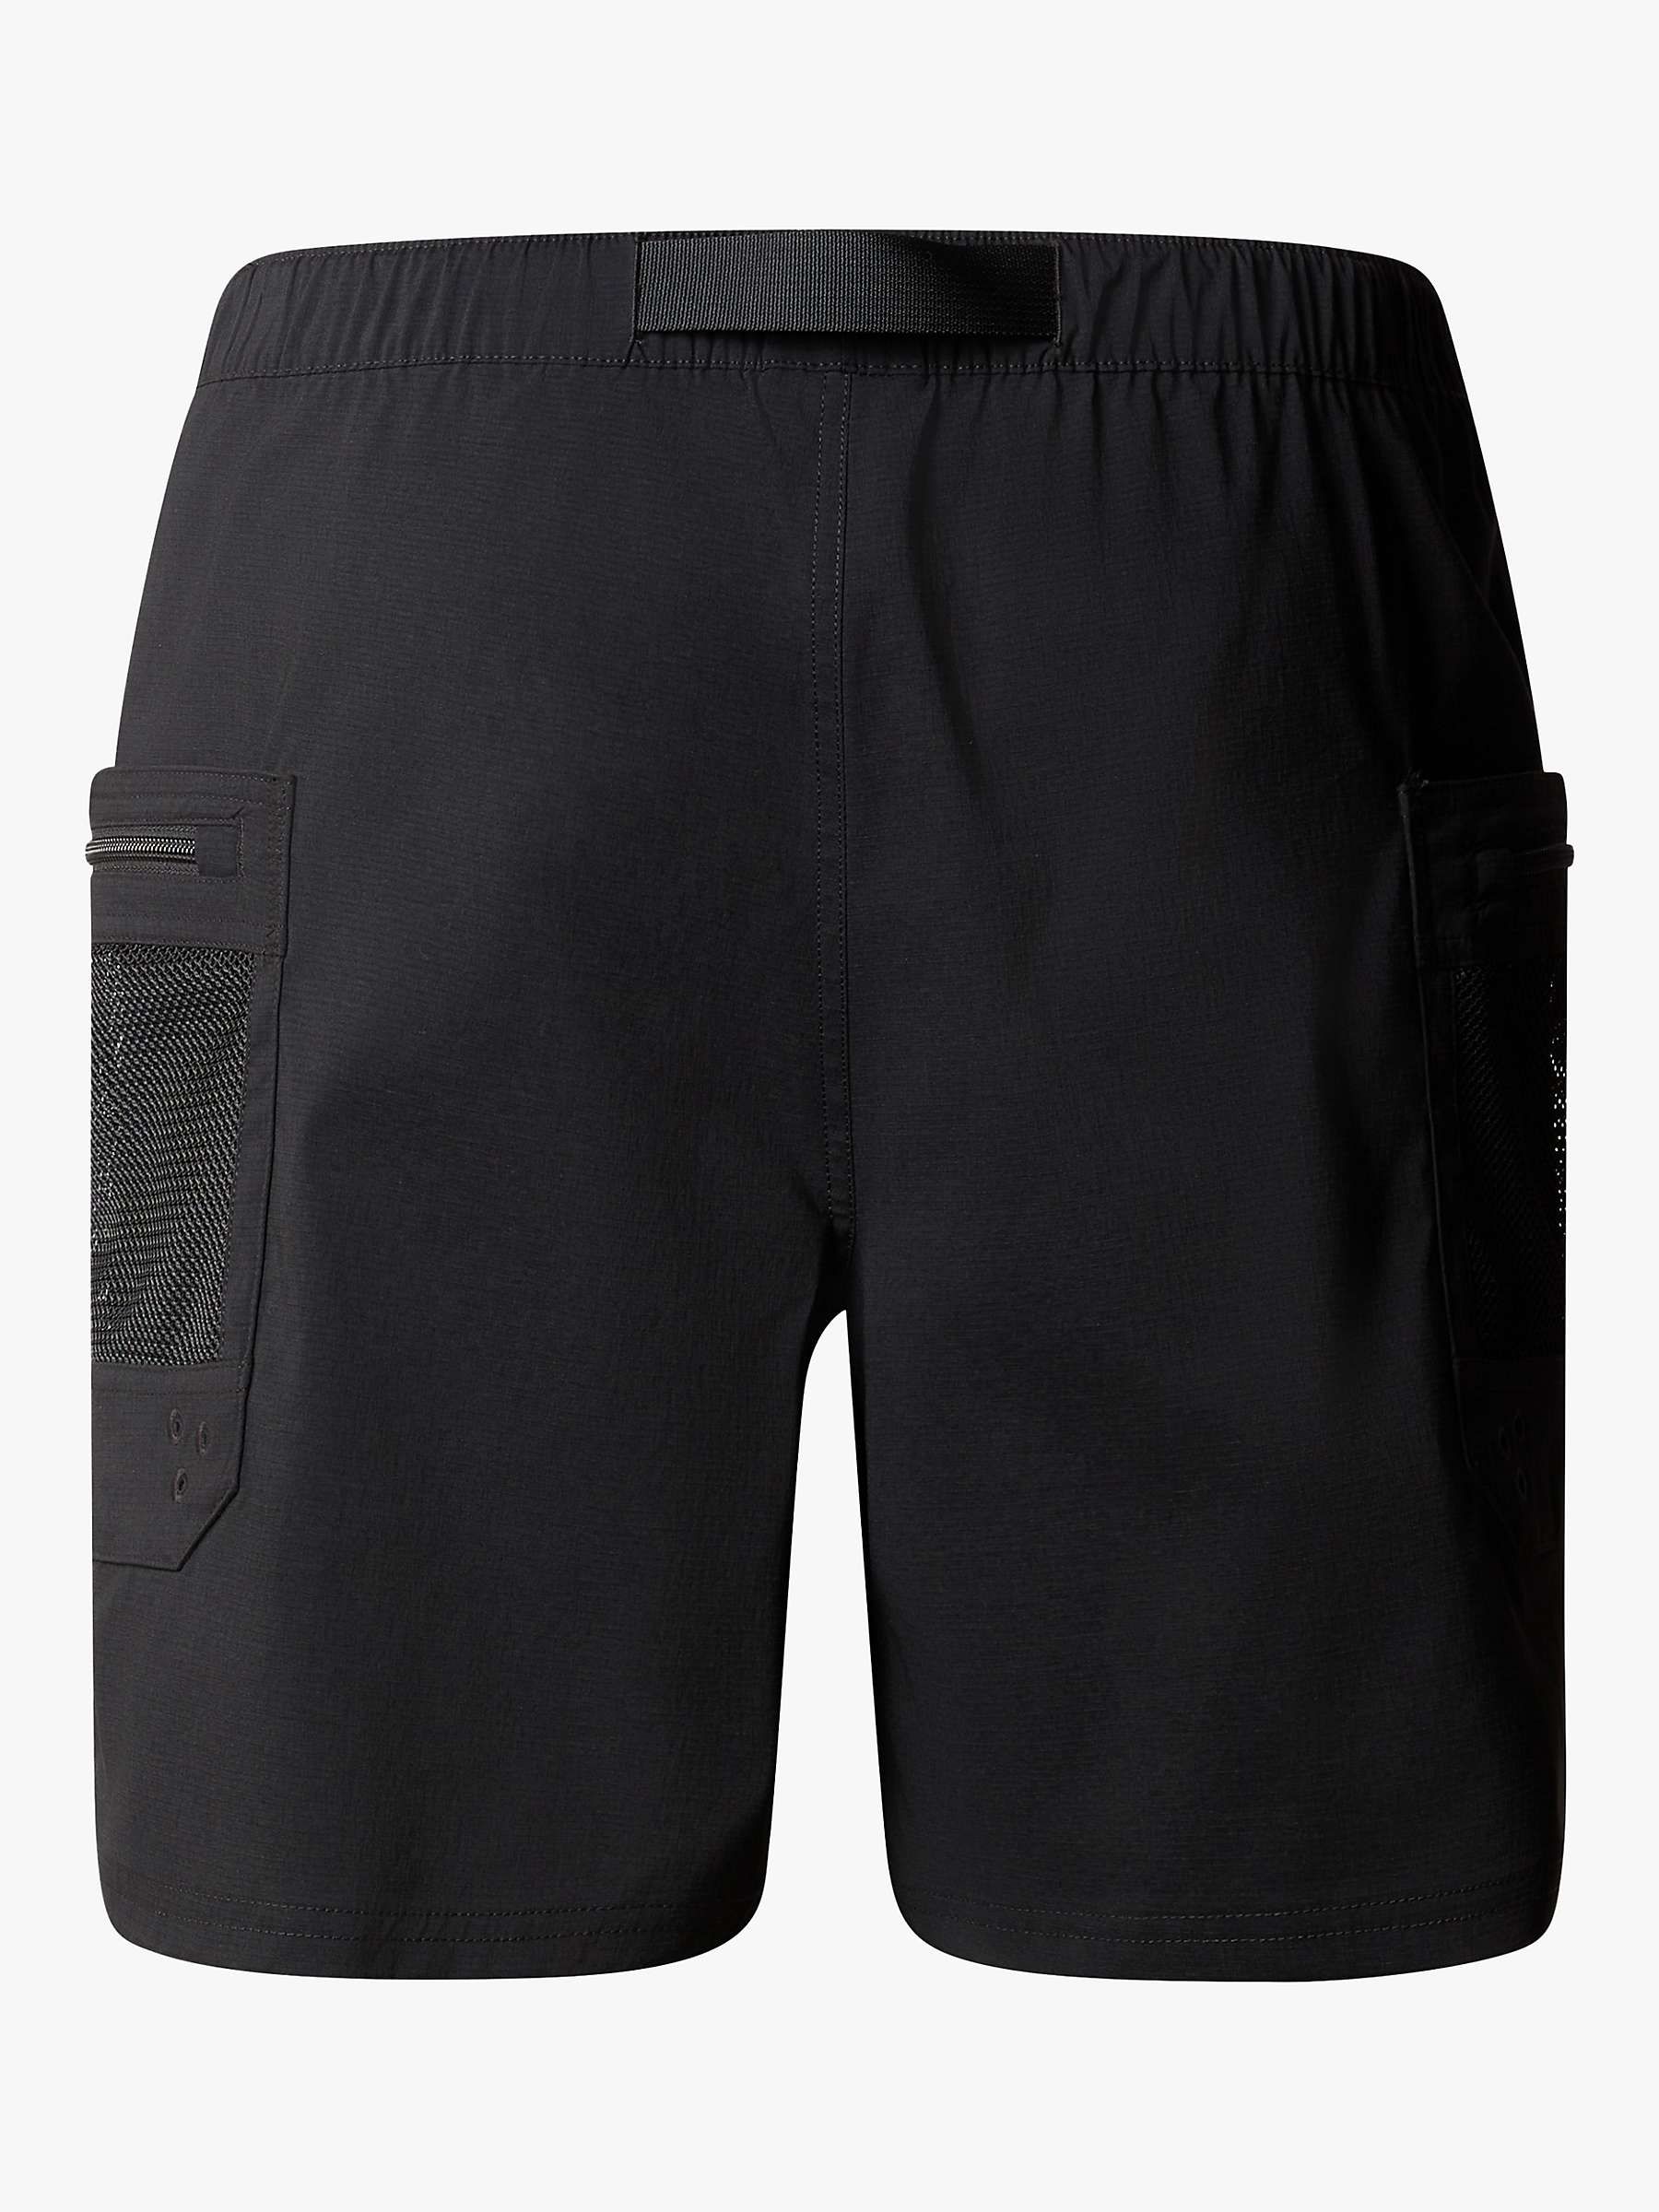 Buy The North Face Relaxed Fit Belted Shorts, Black Online at johnlewis.com